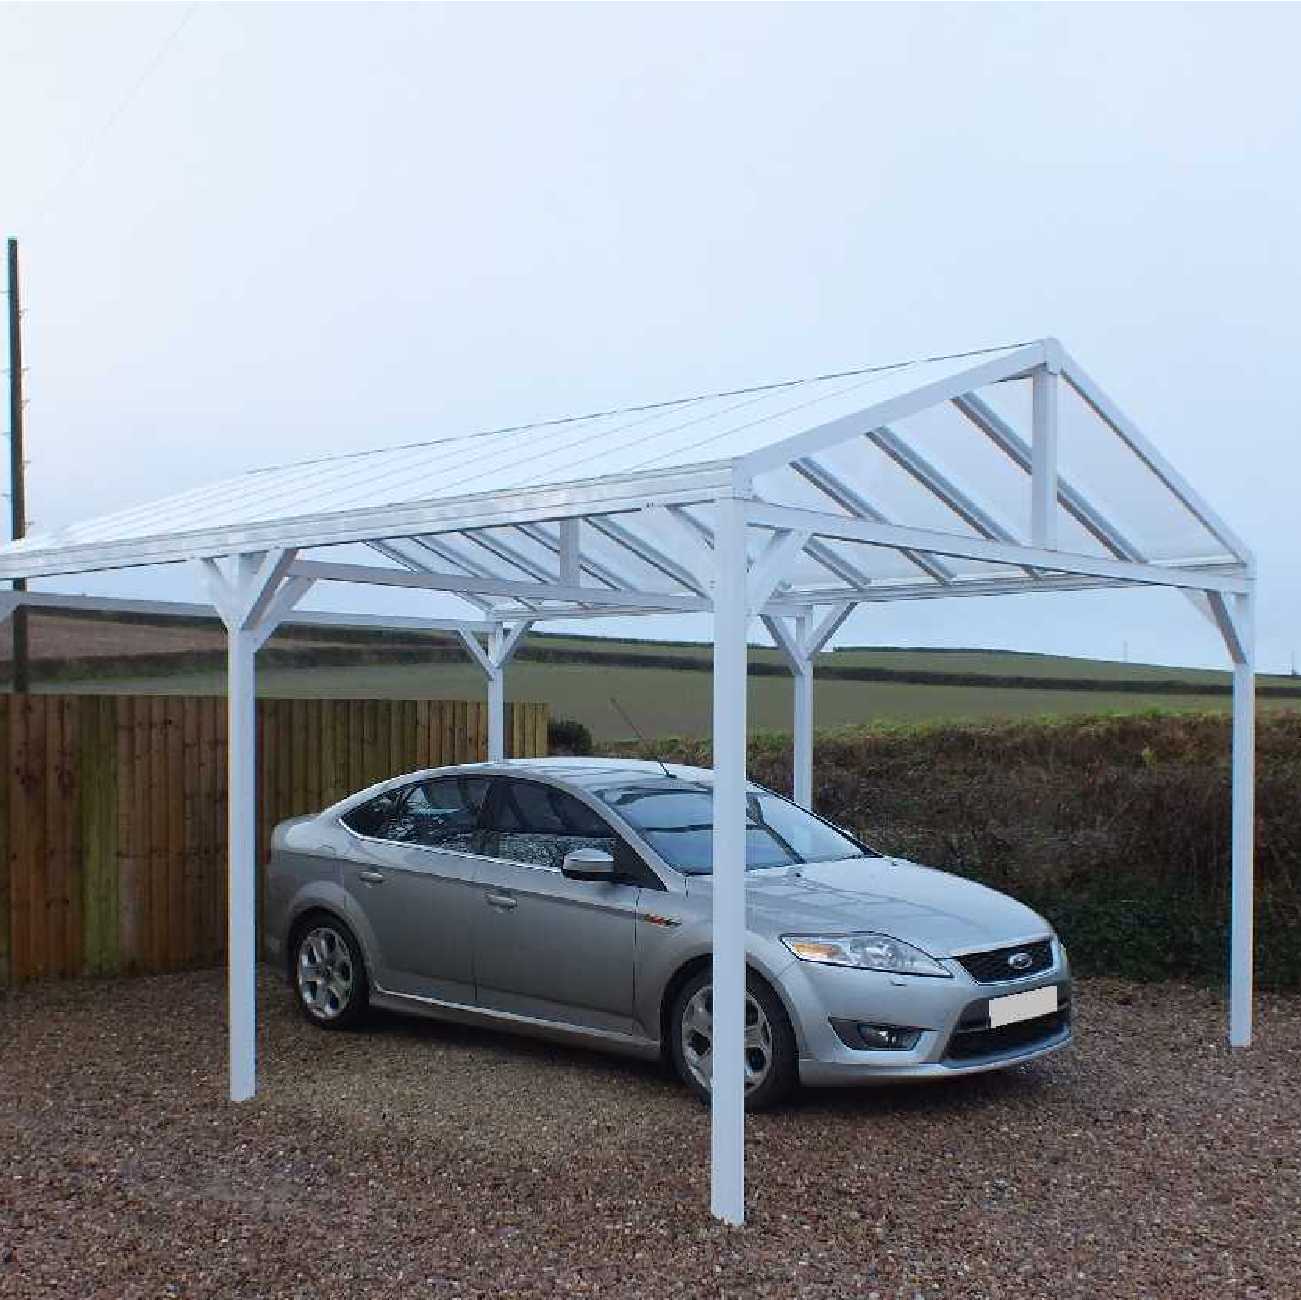 Affordable Omega Smart Free-Standing, White Gable-Roof (type 1) Canopy with 16mm Polycarbonate Glazing - 4.2m (W) x 3.5m (P), (6) Supporting Posts